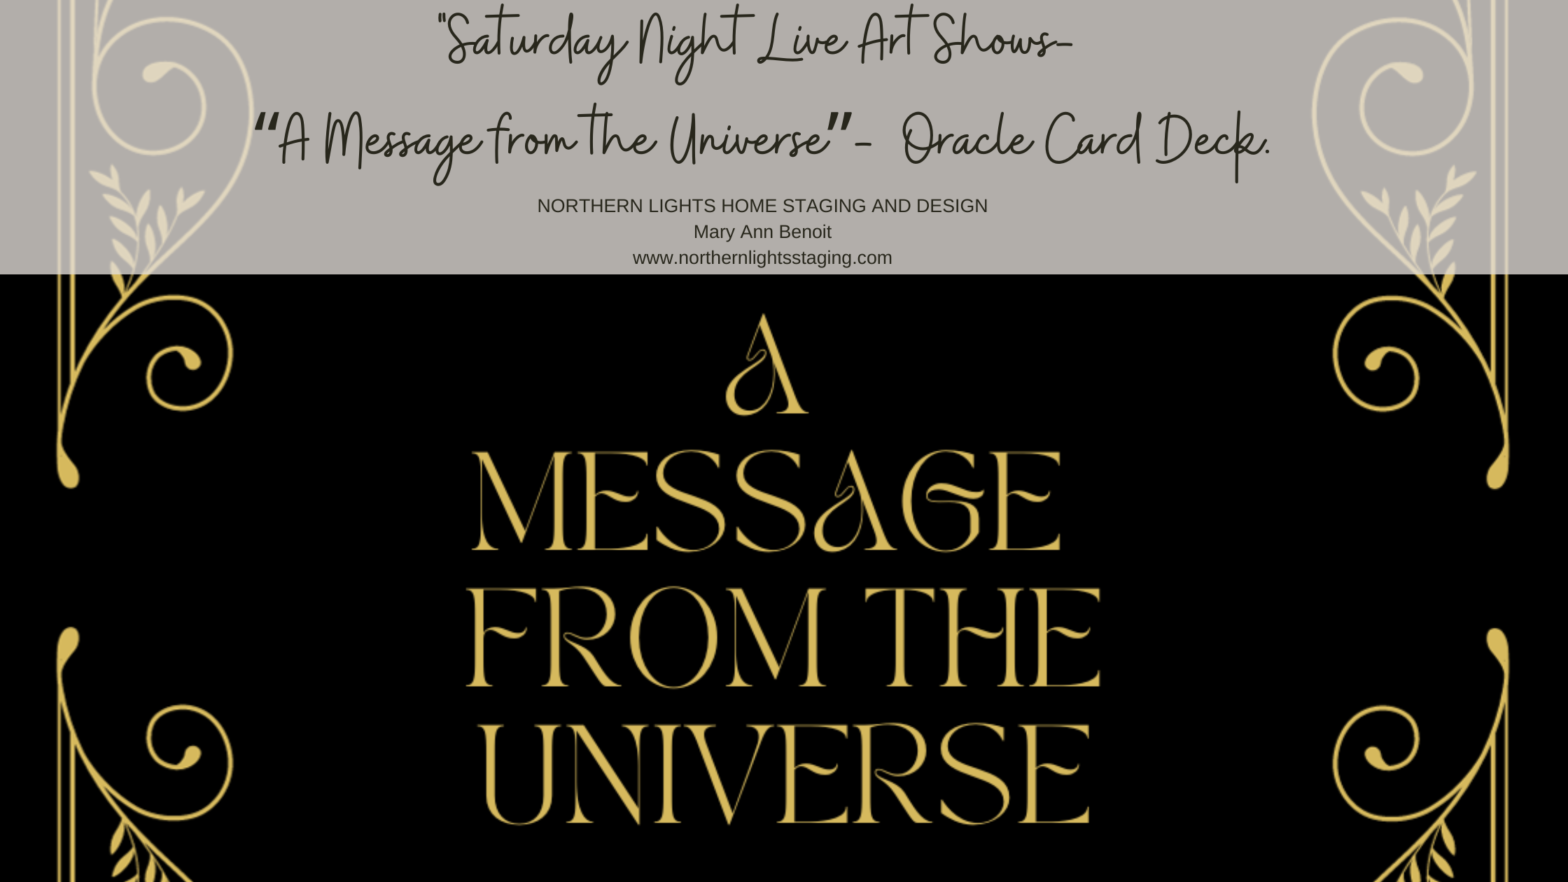 Saturday Night Live Art Shows- "A Message From The Universe" oracle card deck on Deckible.